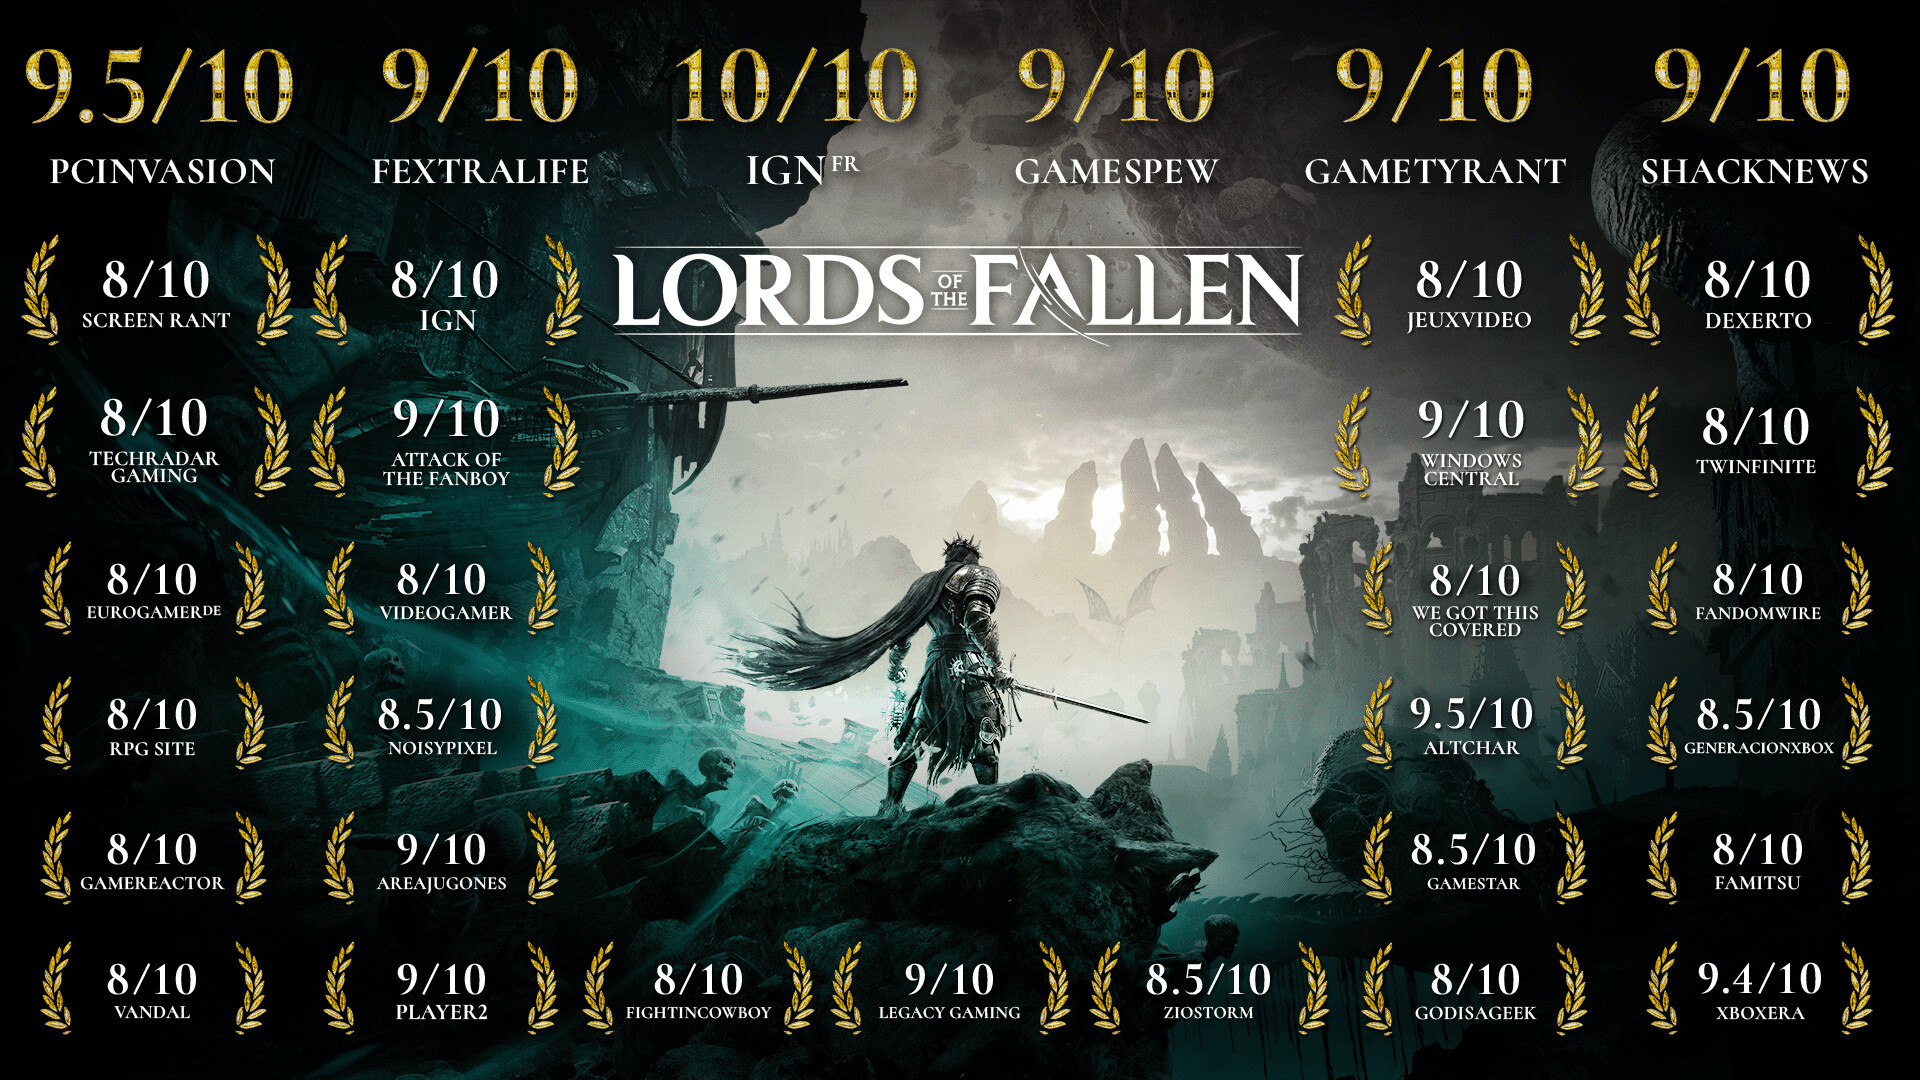 LORDS OF THE FALLEN on X: Update v1.1.310 is live on all platforms  ✓Inventory Expansion ✓Key items no longer affect inventory limitations  ✓Online Multiplayer on Steam Deck ✓100+ further enhancements We're also